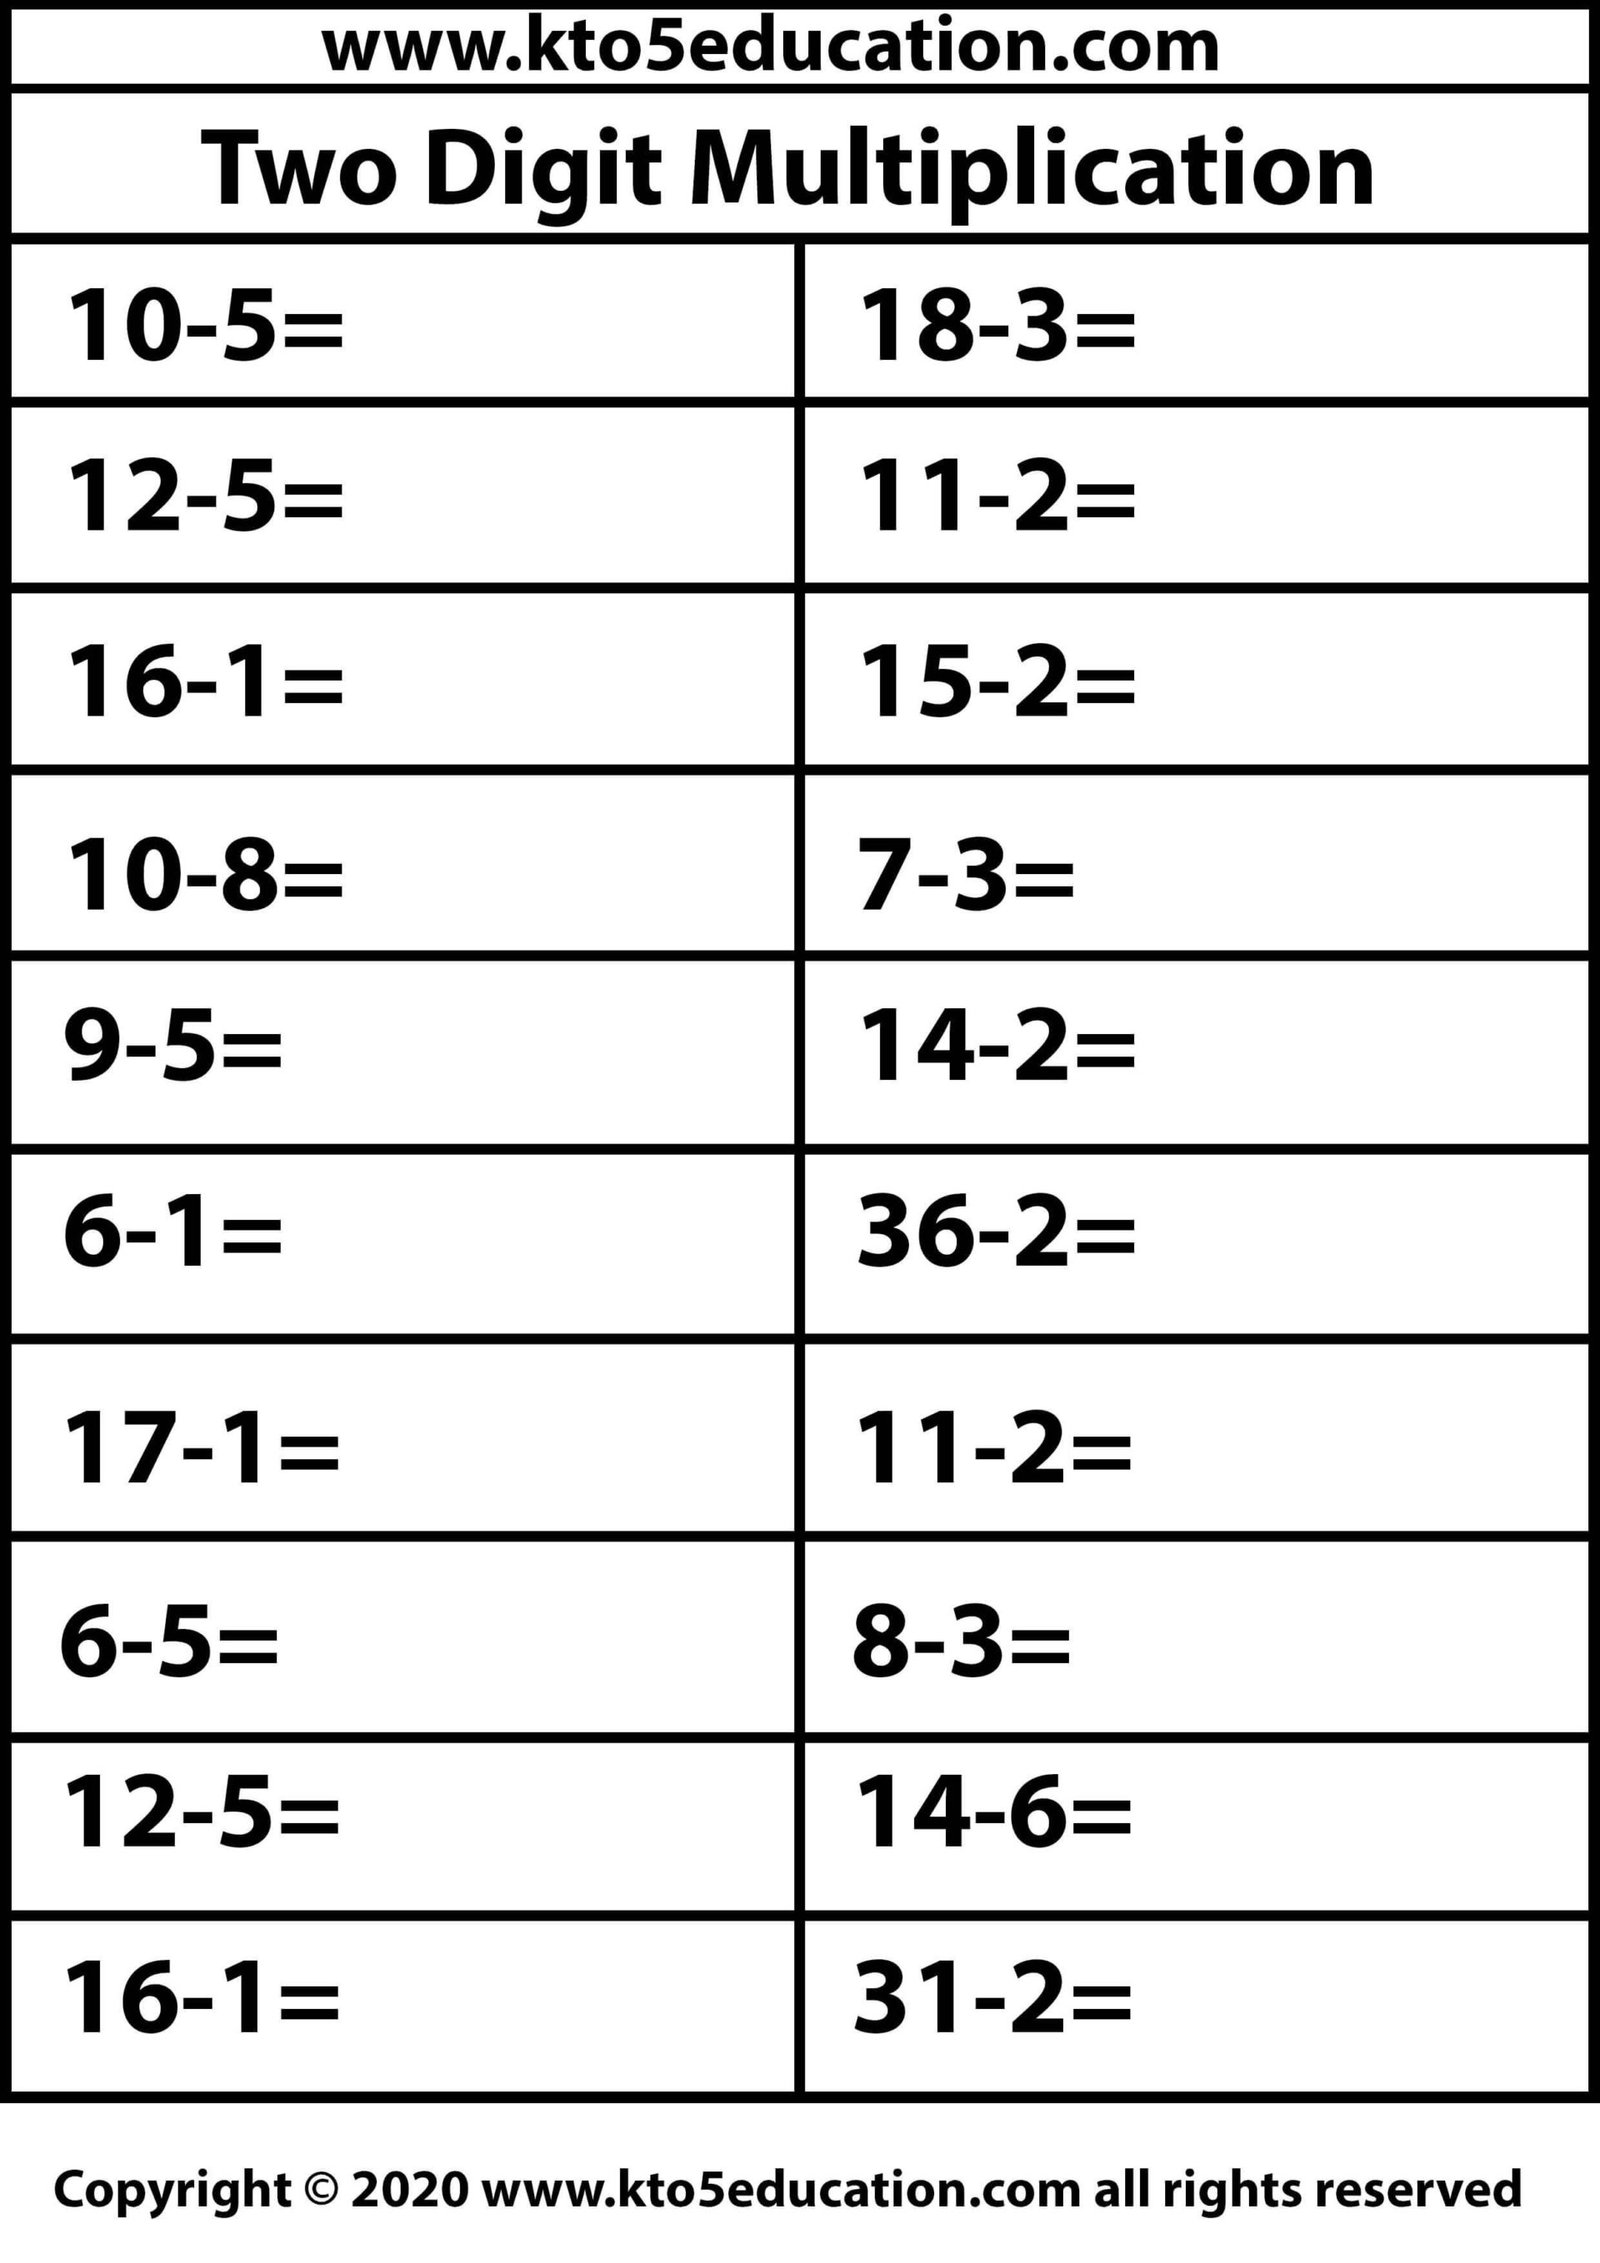 Two Digit Subtraction Worksheet 1 - Kto5Education